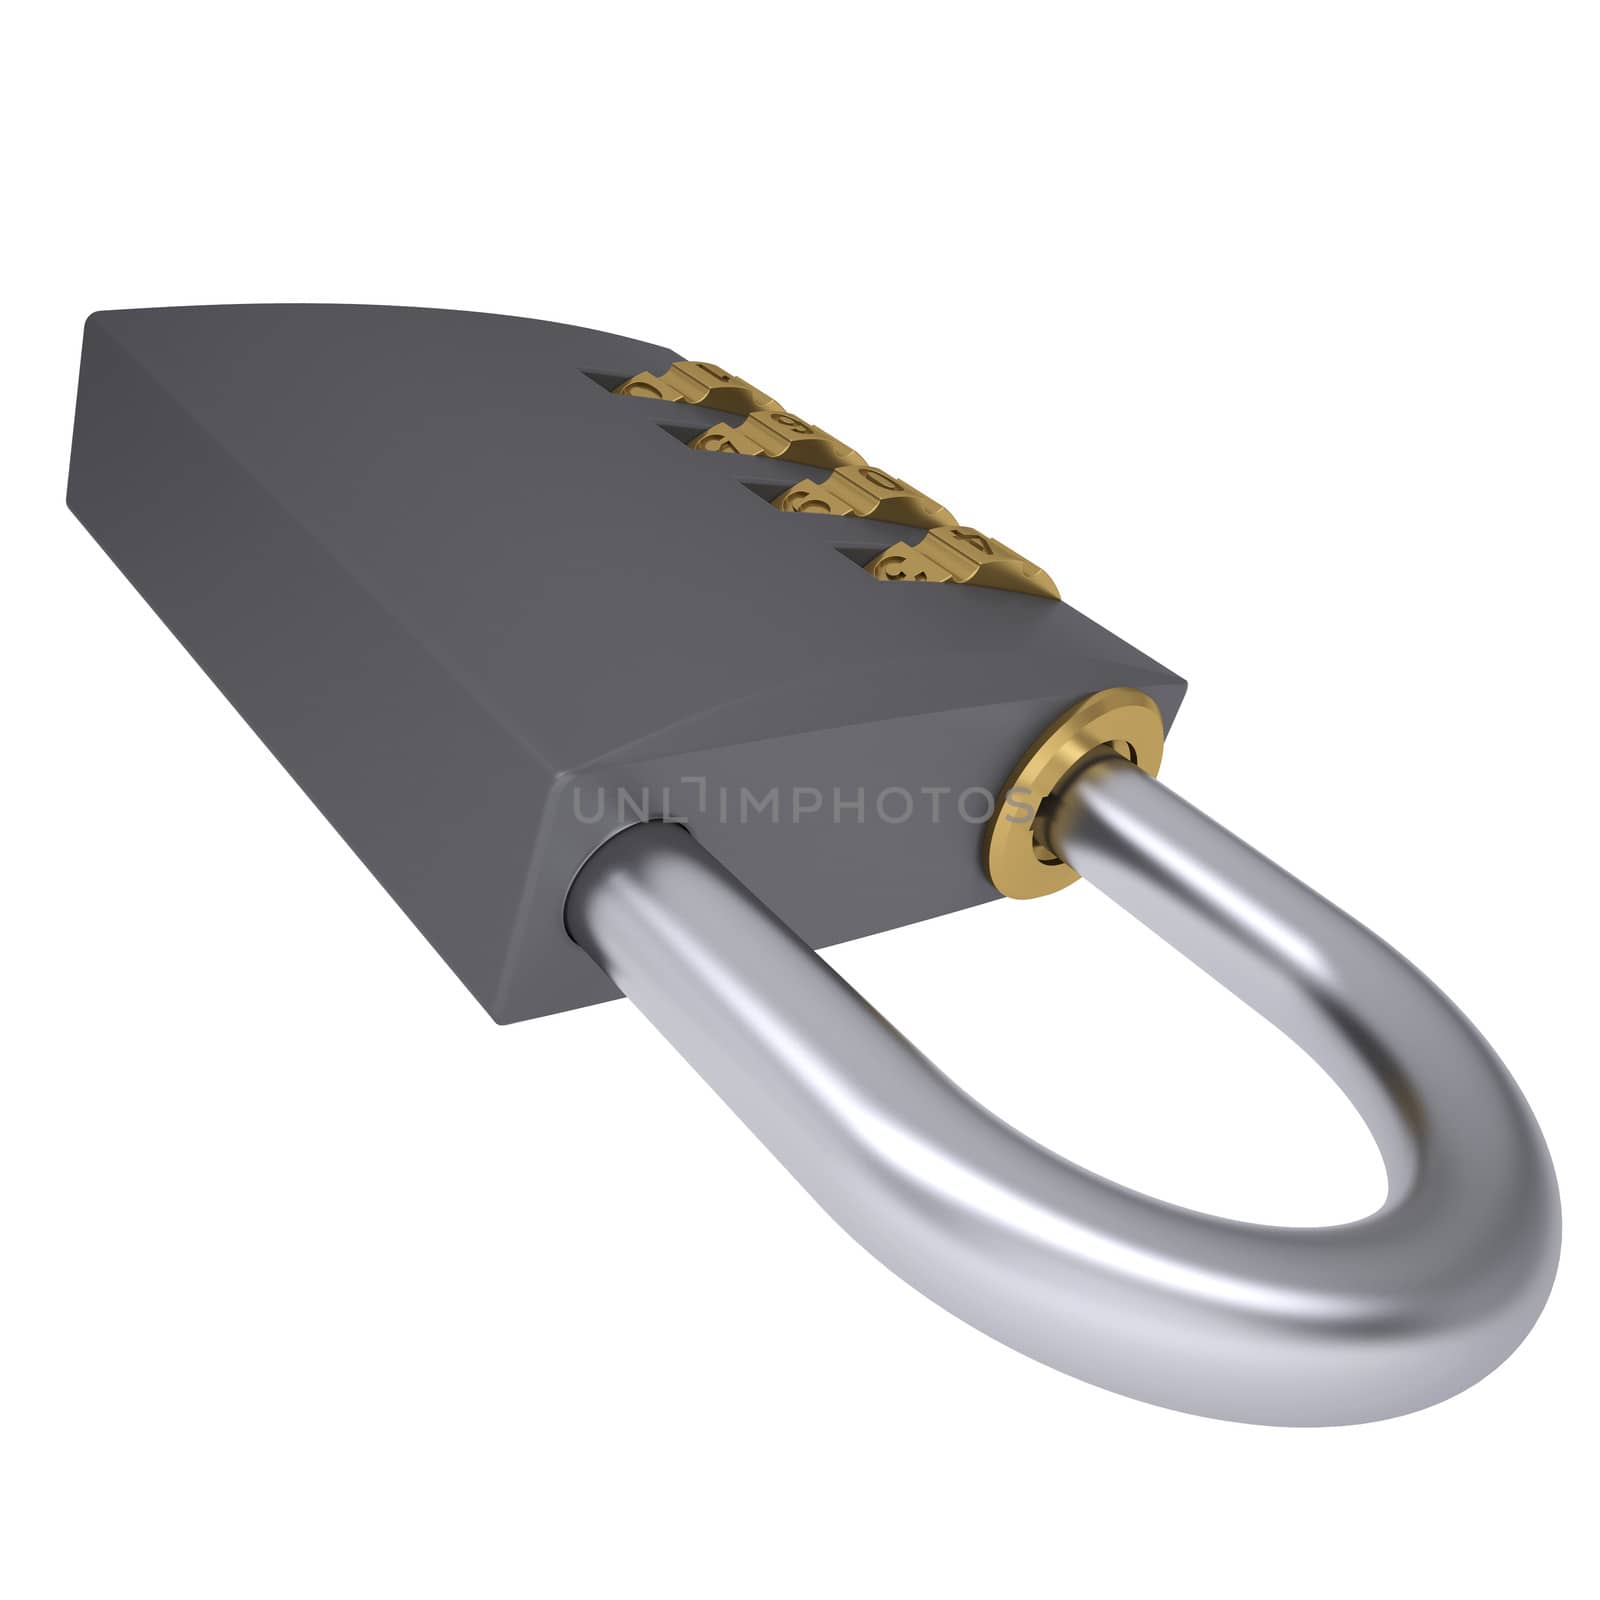 Combination padlock. Isolated render on a white background